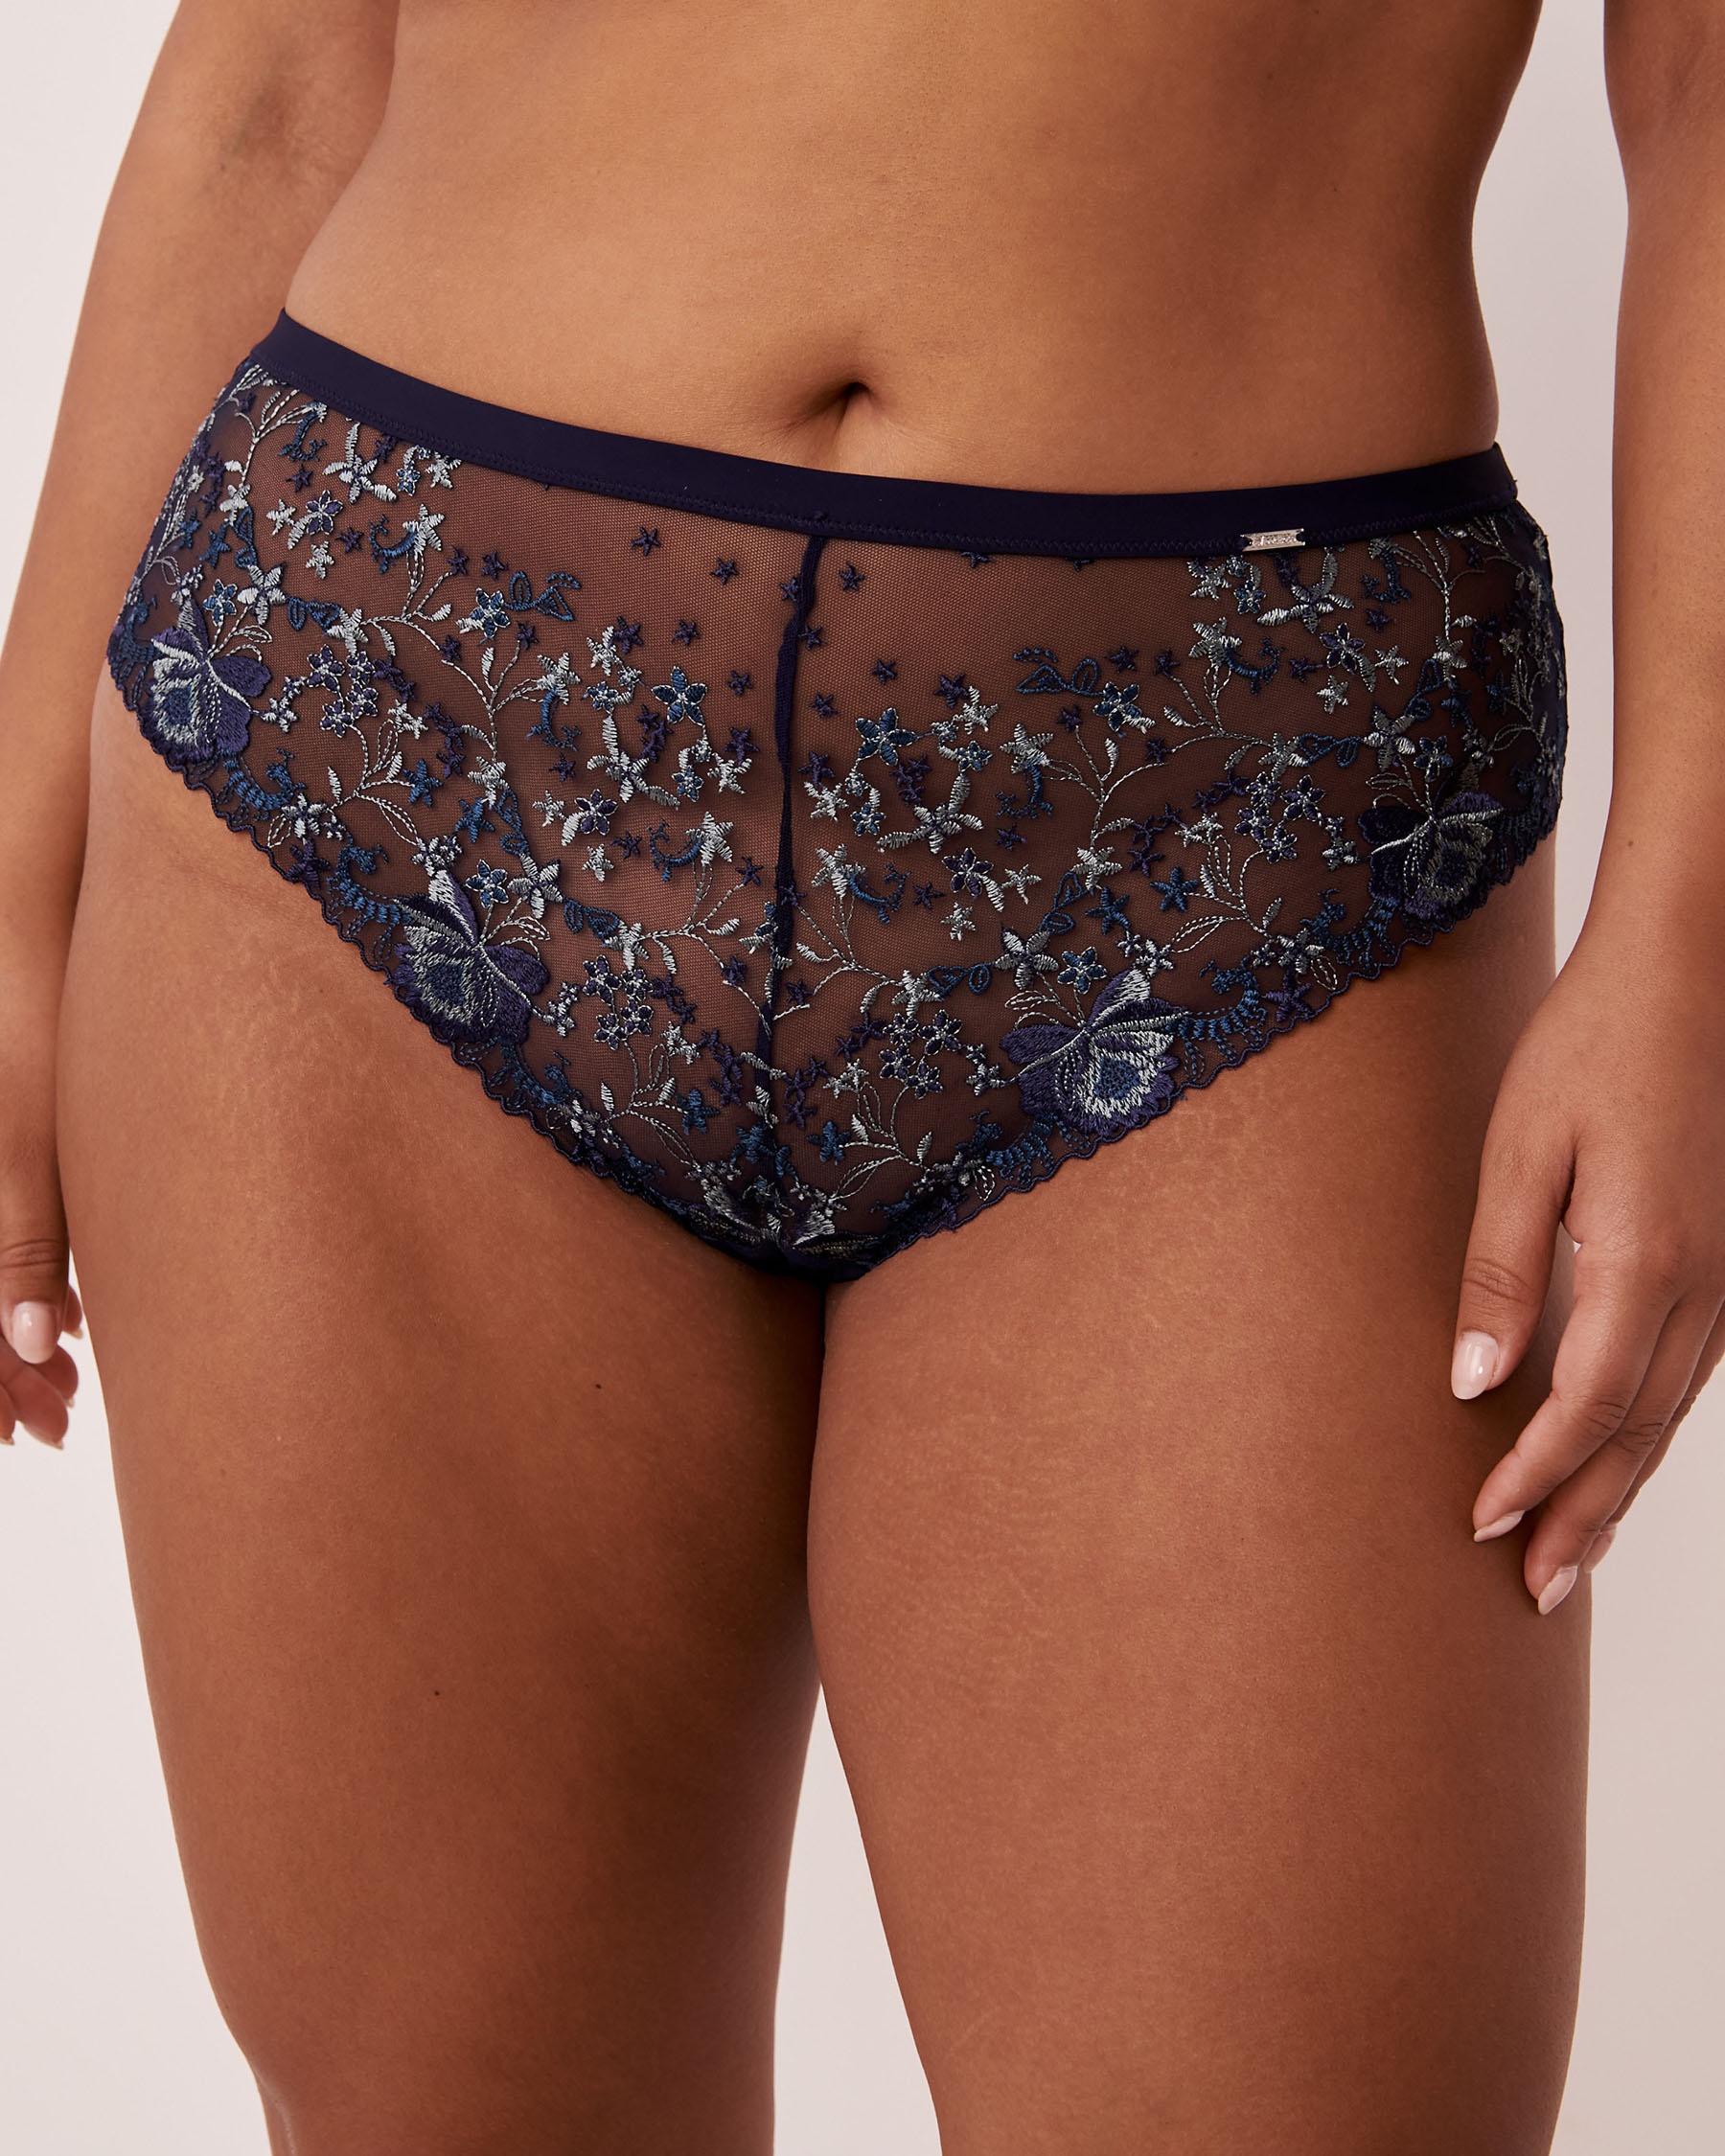 LA VIE EN ROSE Embroidered Mesh Cheeky Panty Romantic navy floral 20300143 - View5